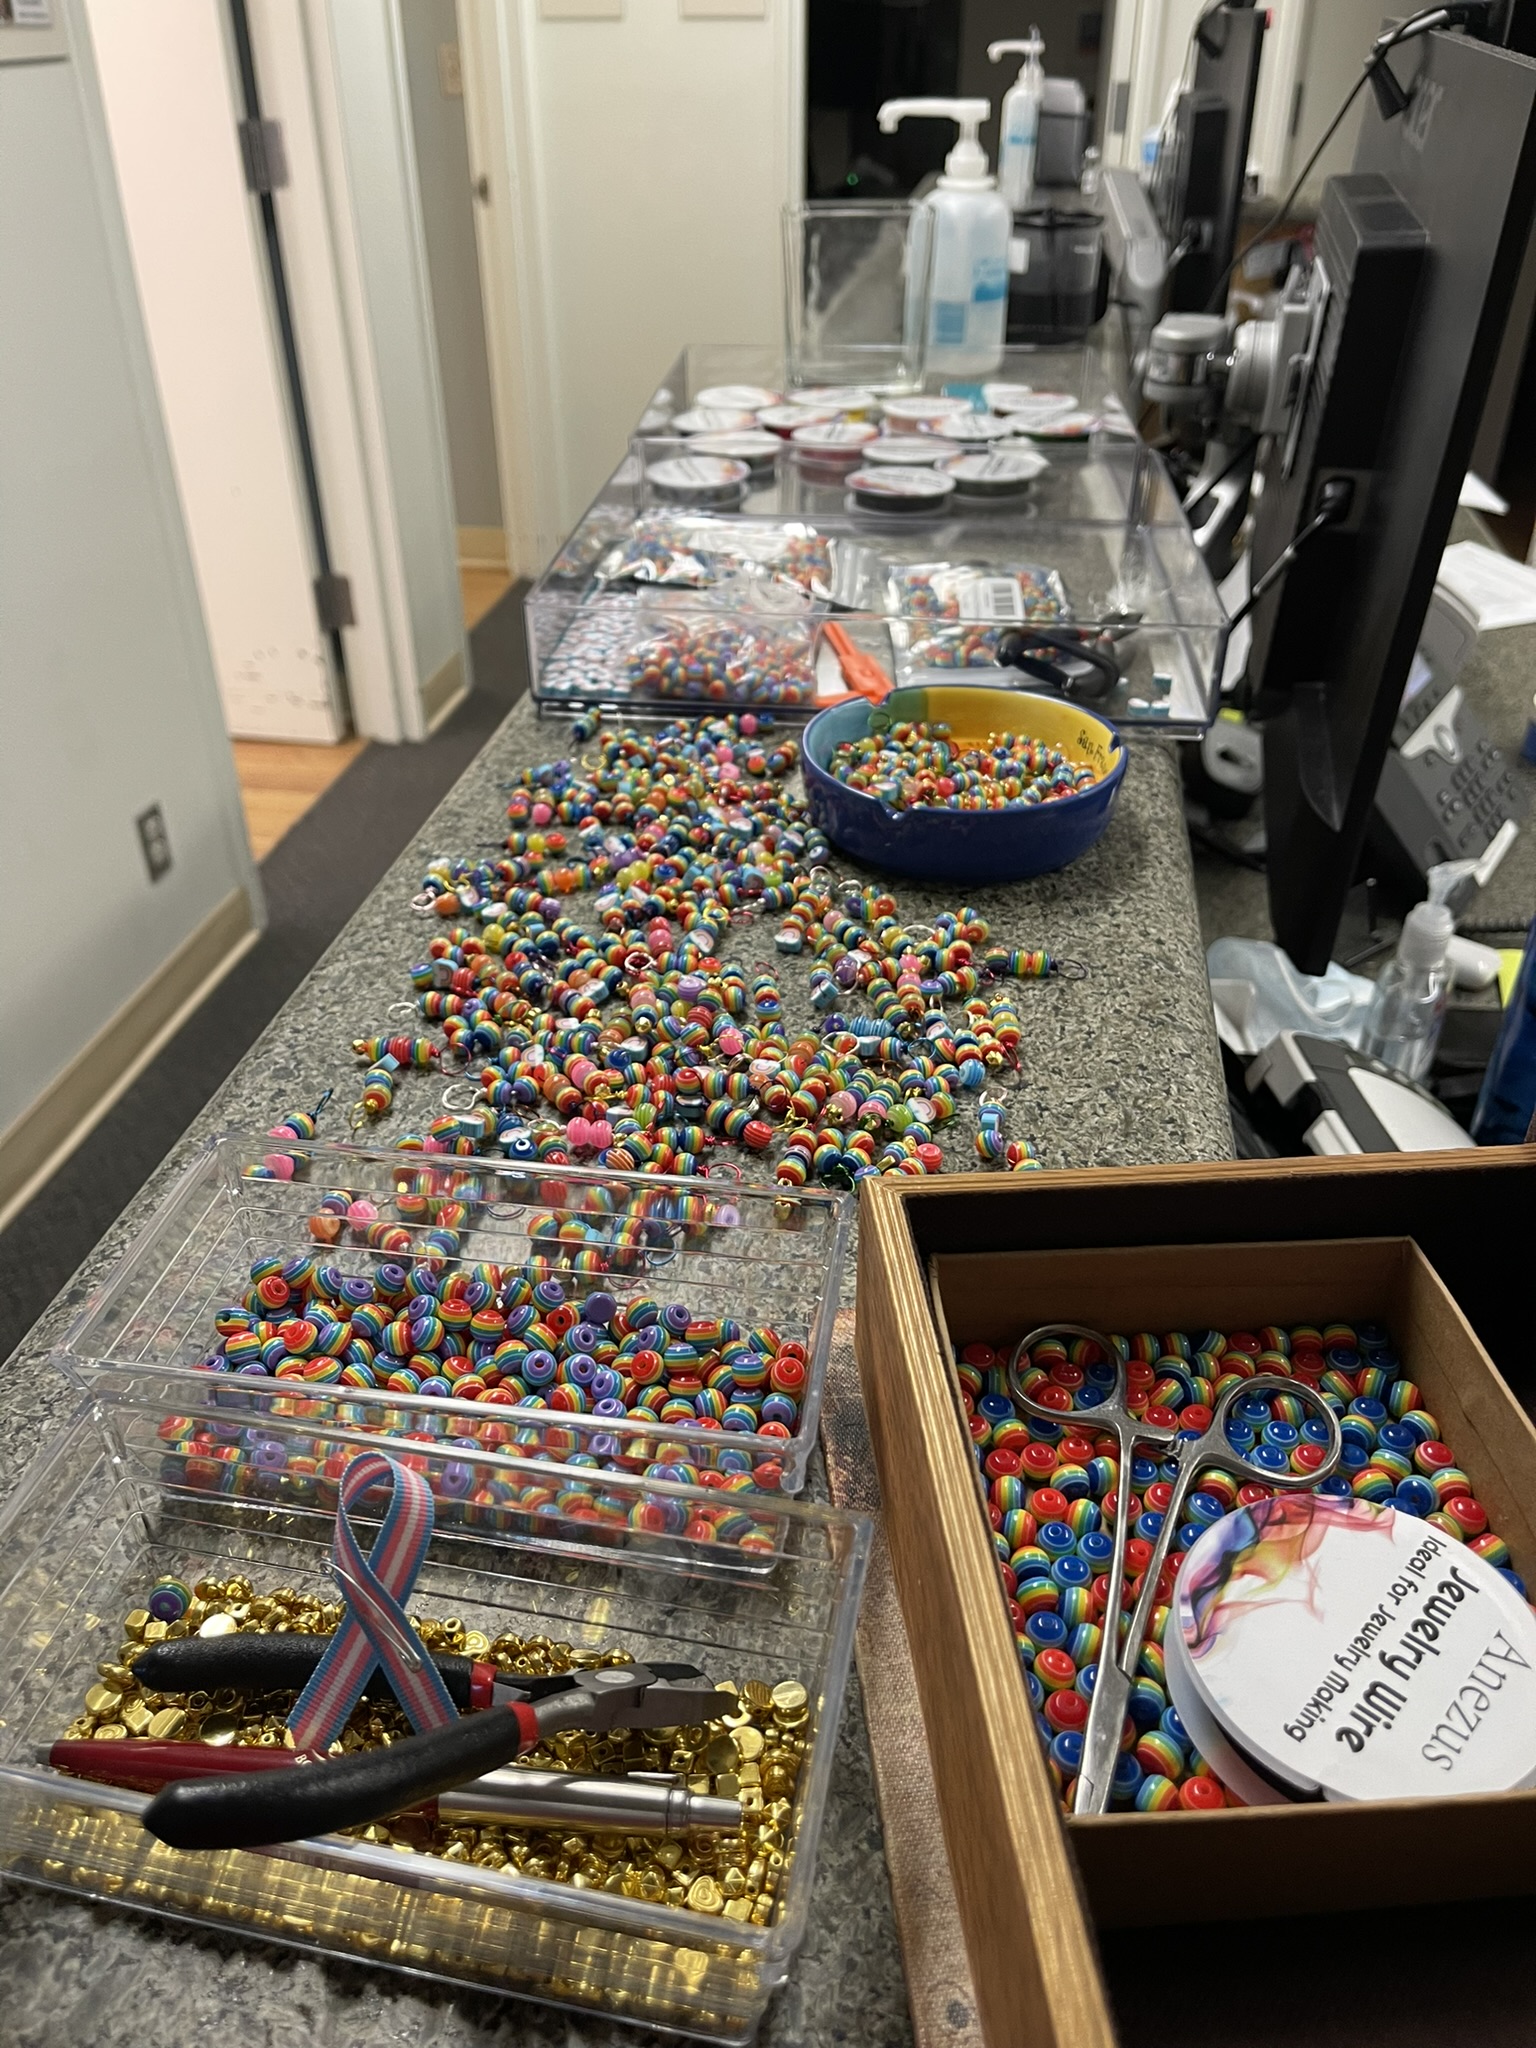 Colorful rainbow beads, jewelry wire and craft containers fill an office workspace